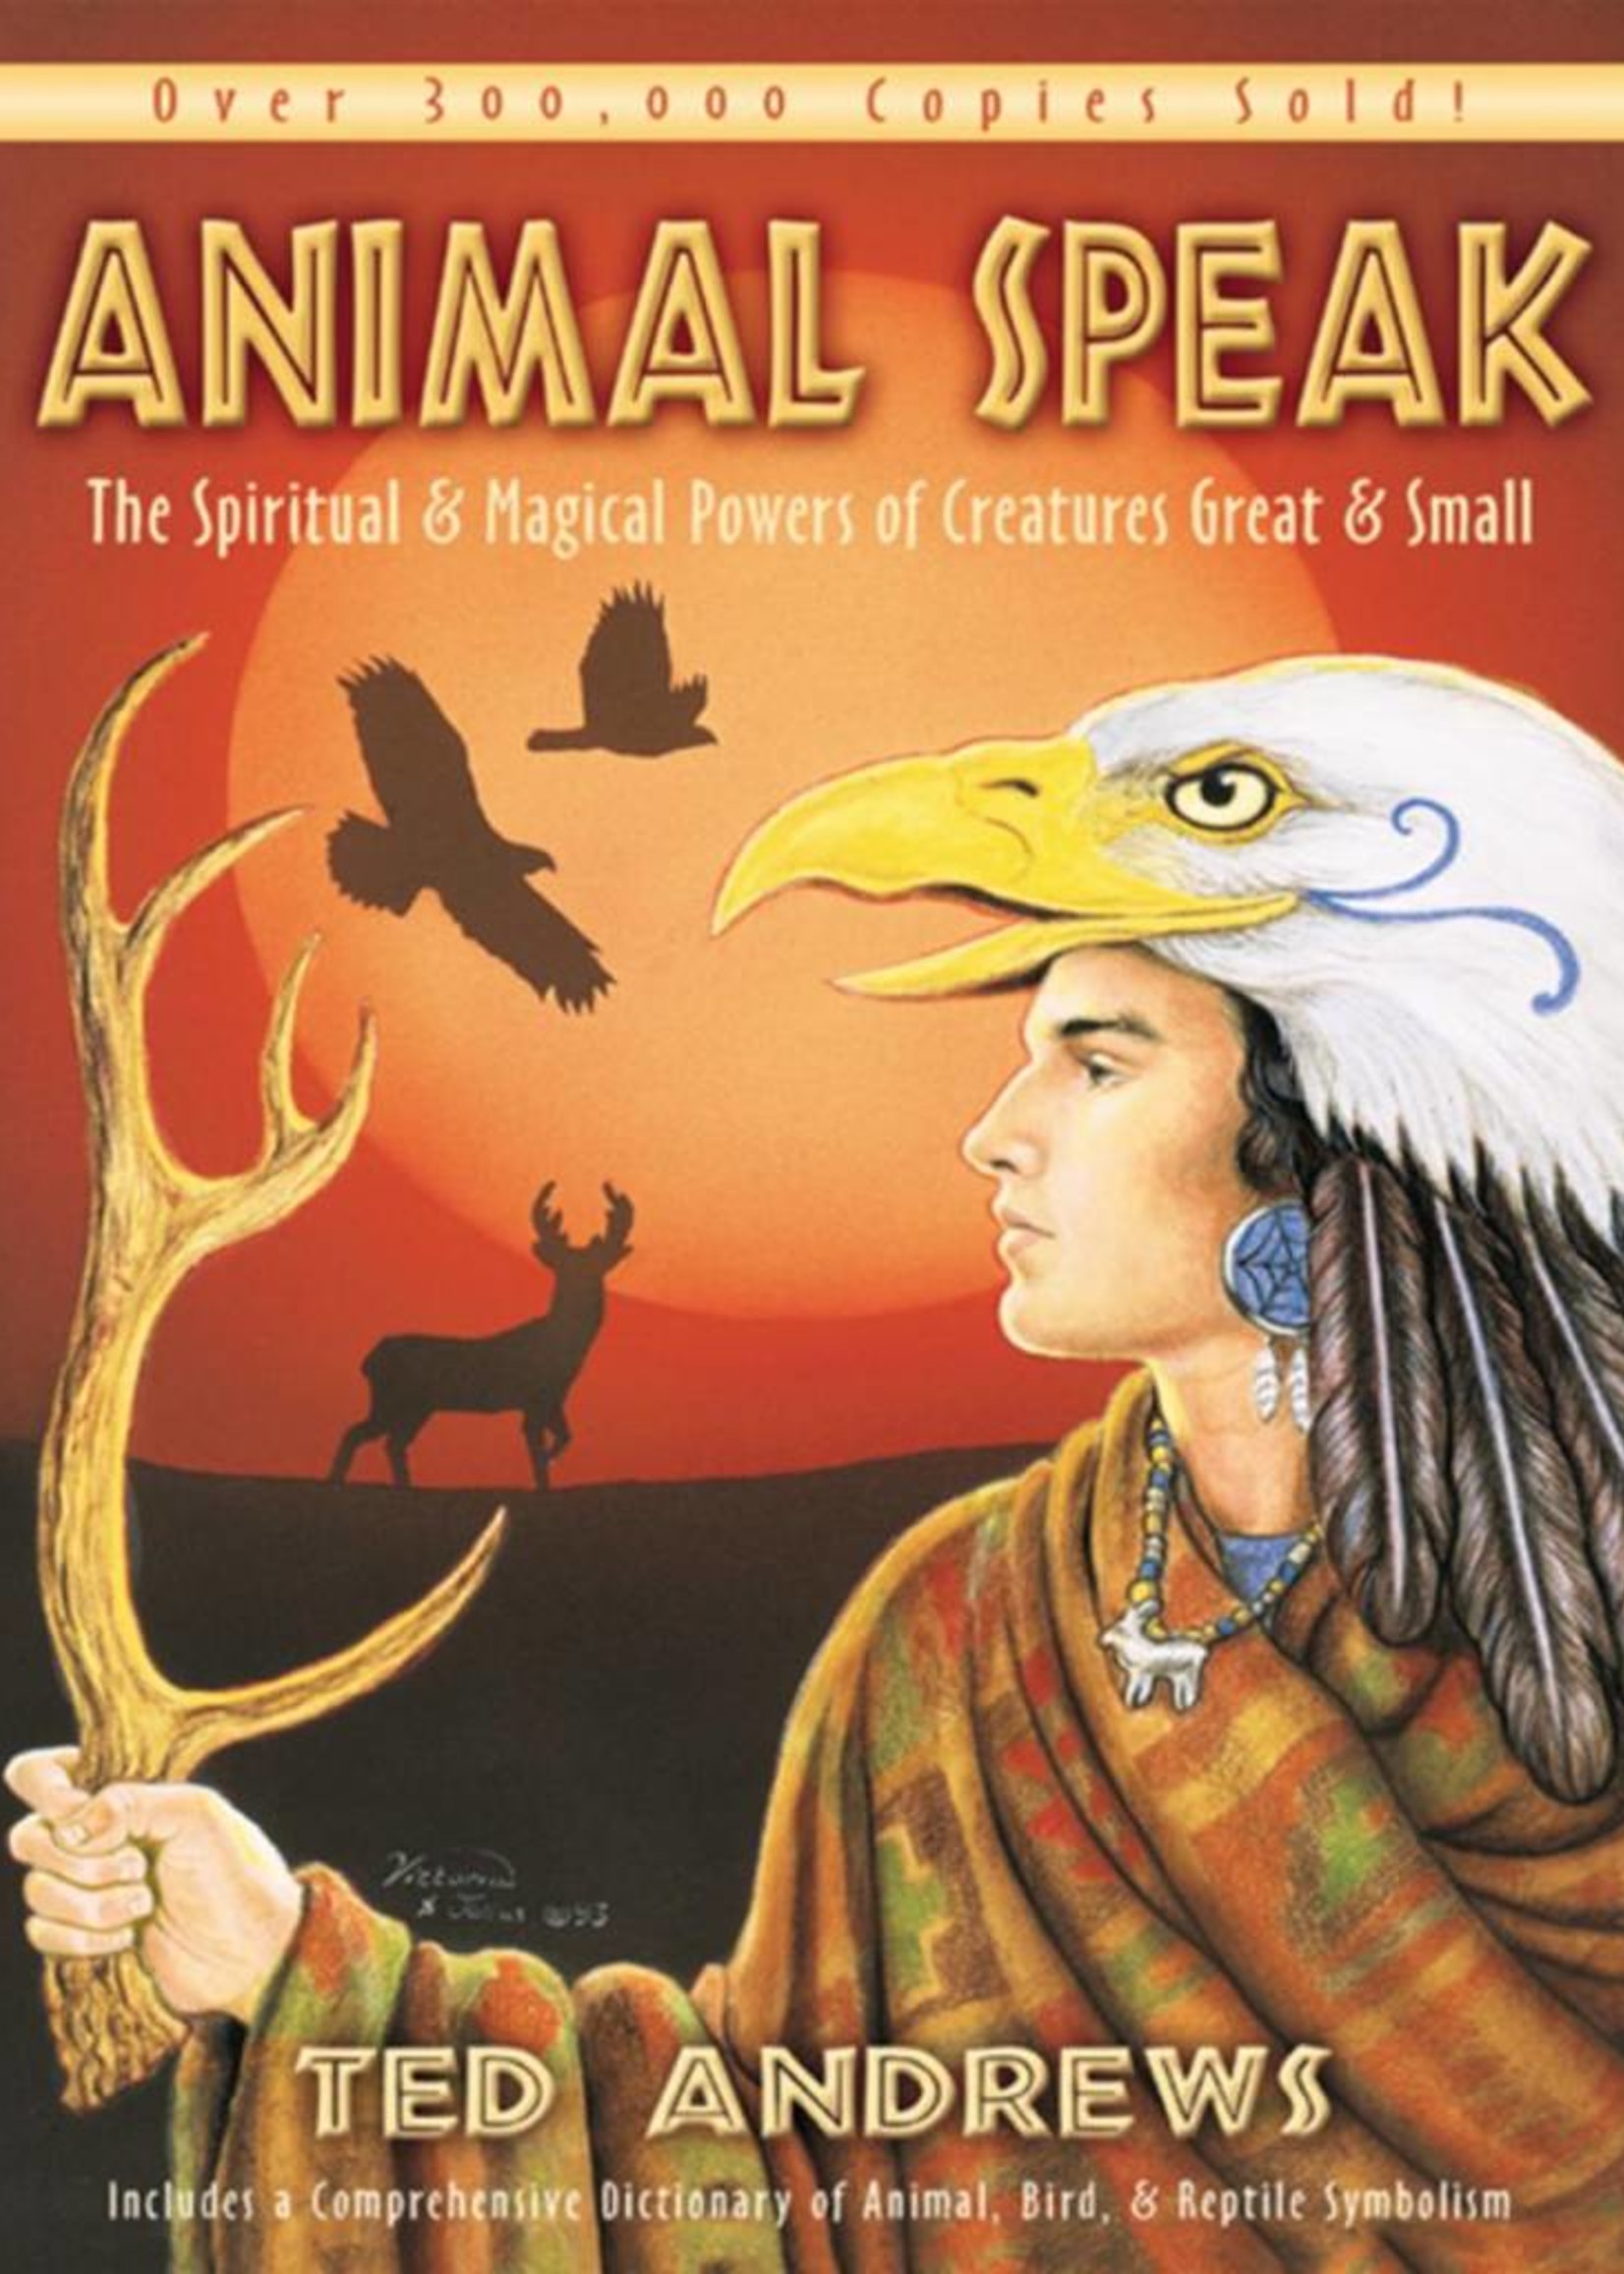 Animal-Speak | The Spiritual & Magical Powers of Creatures Great & Small